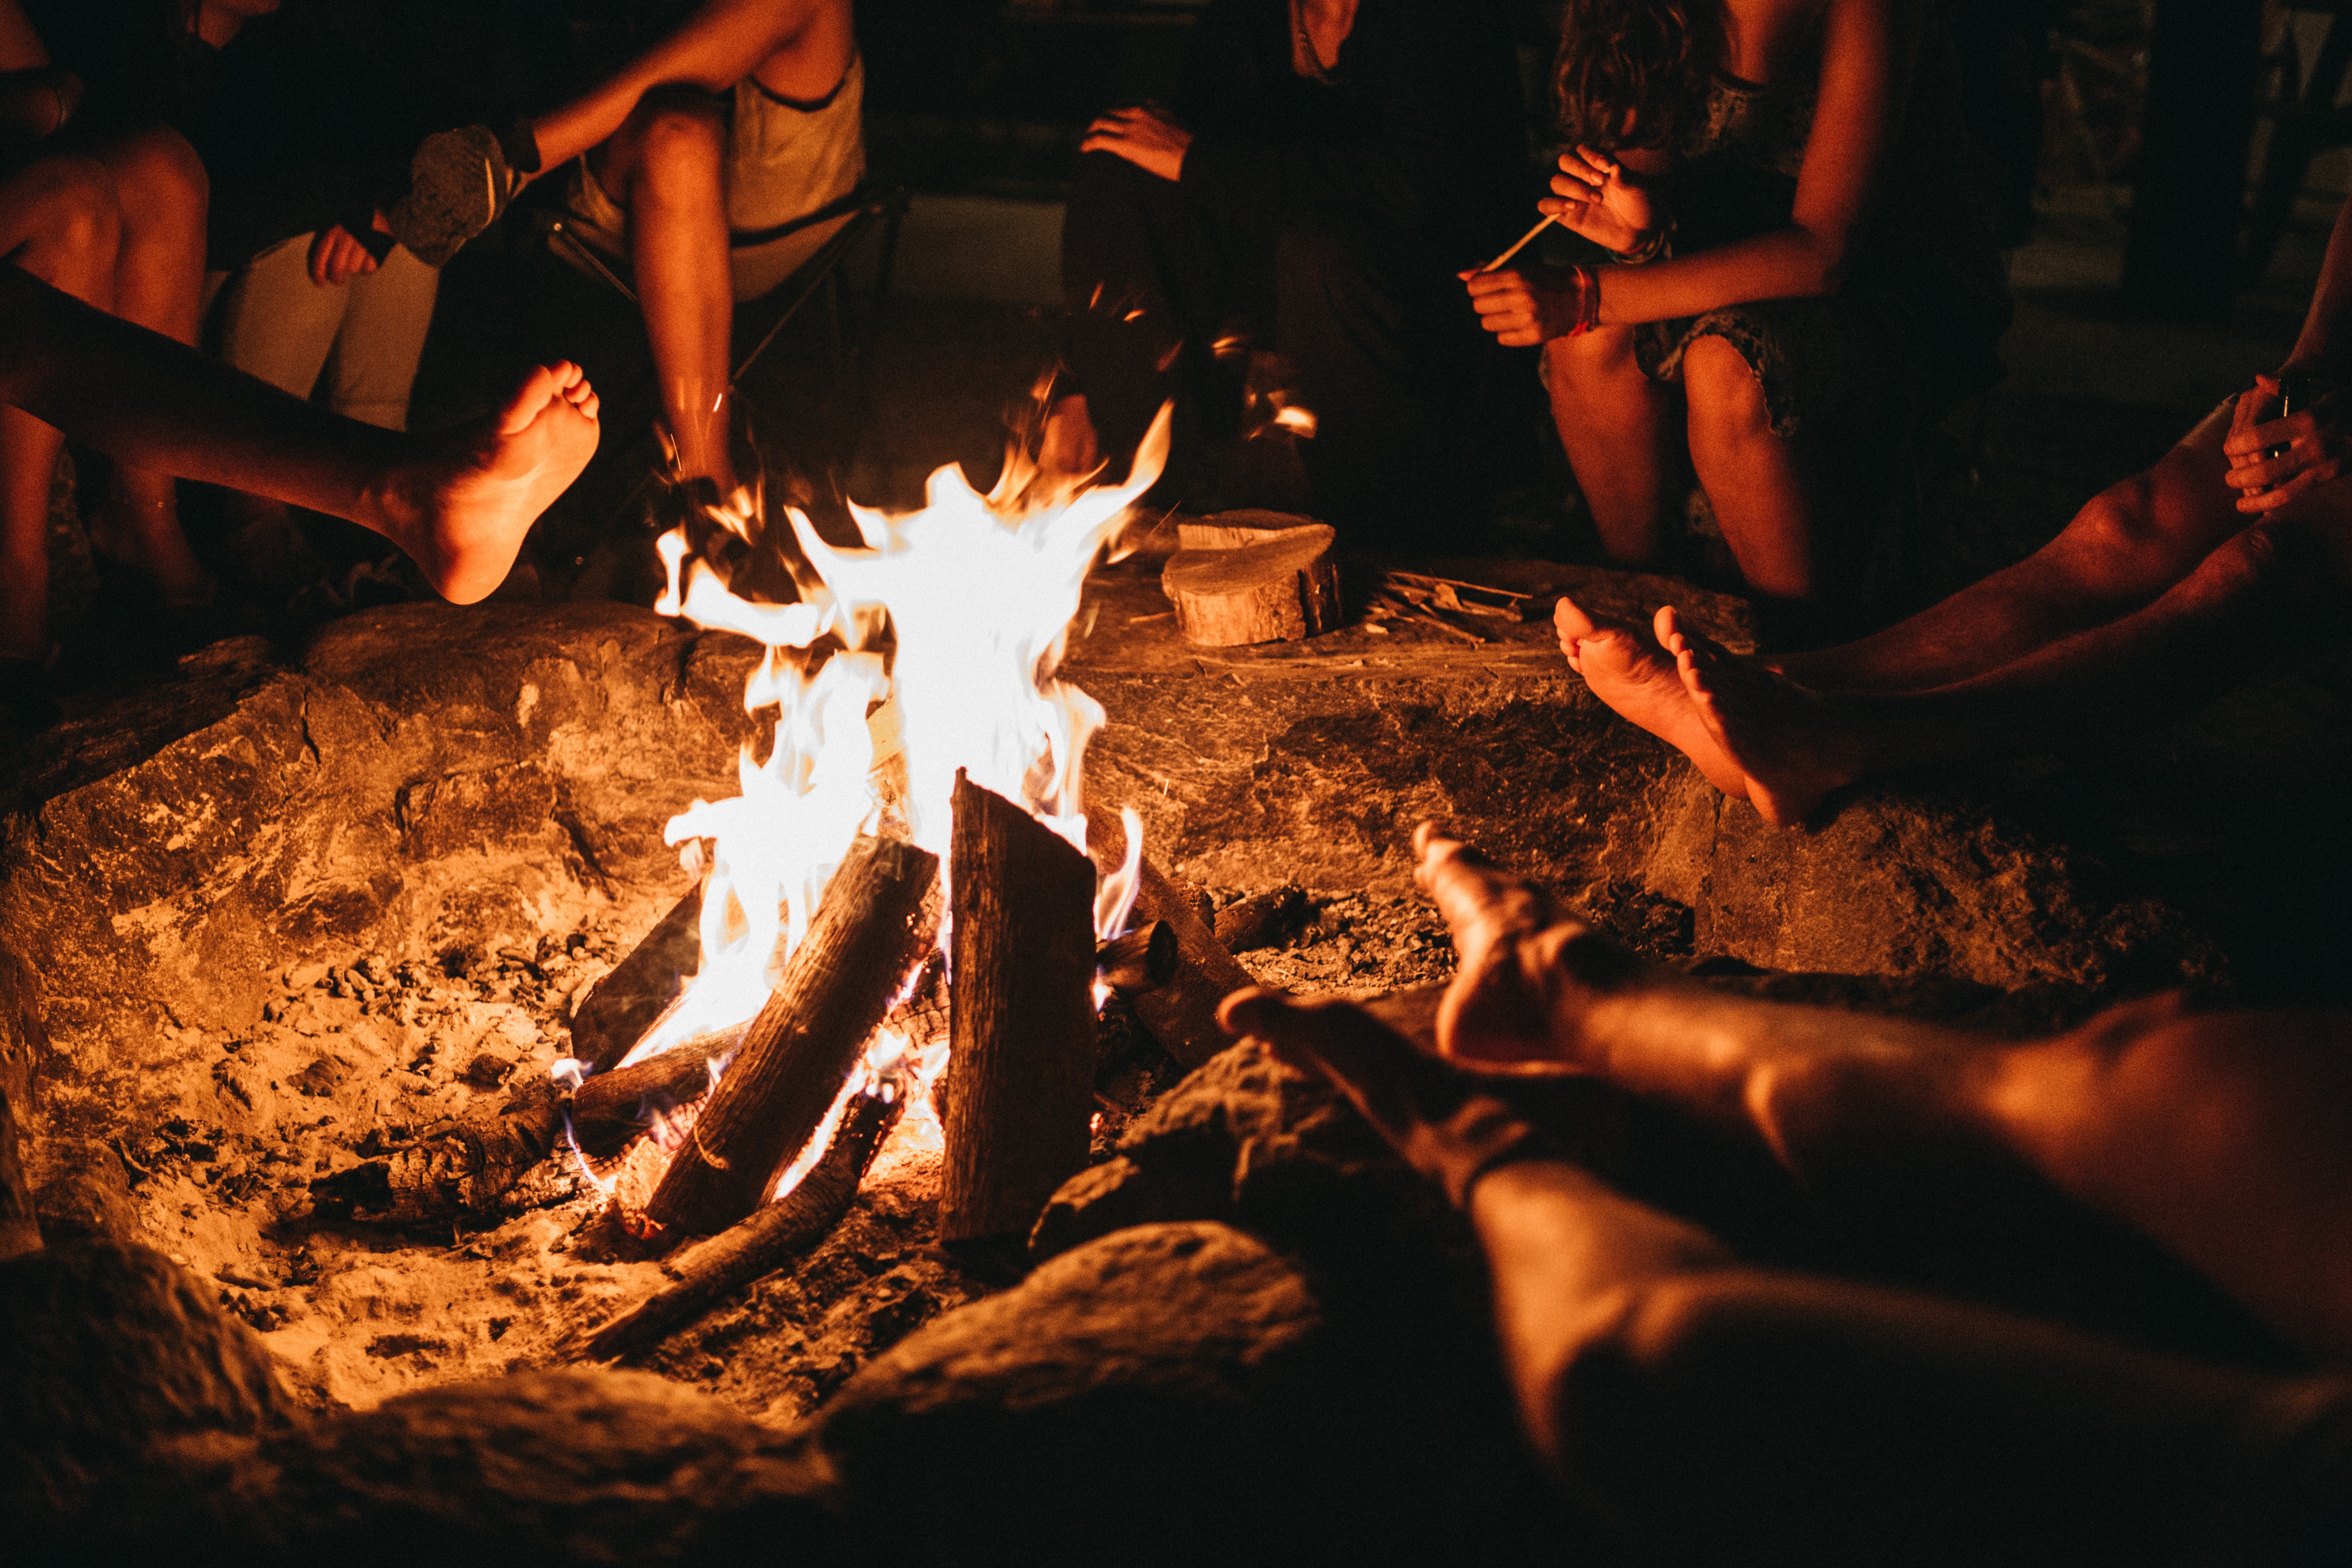 Close up of a group of friends gathered around a bonfire. Only their legs and feet can be seen, and the fire is at the center of the image.